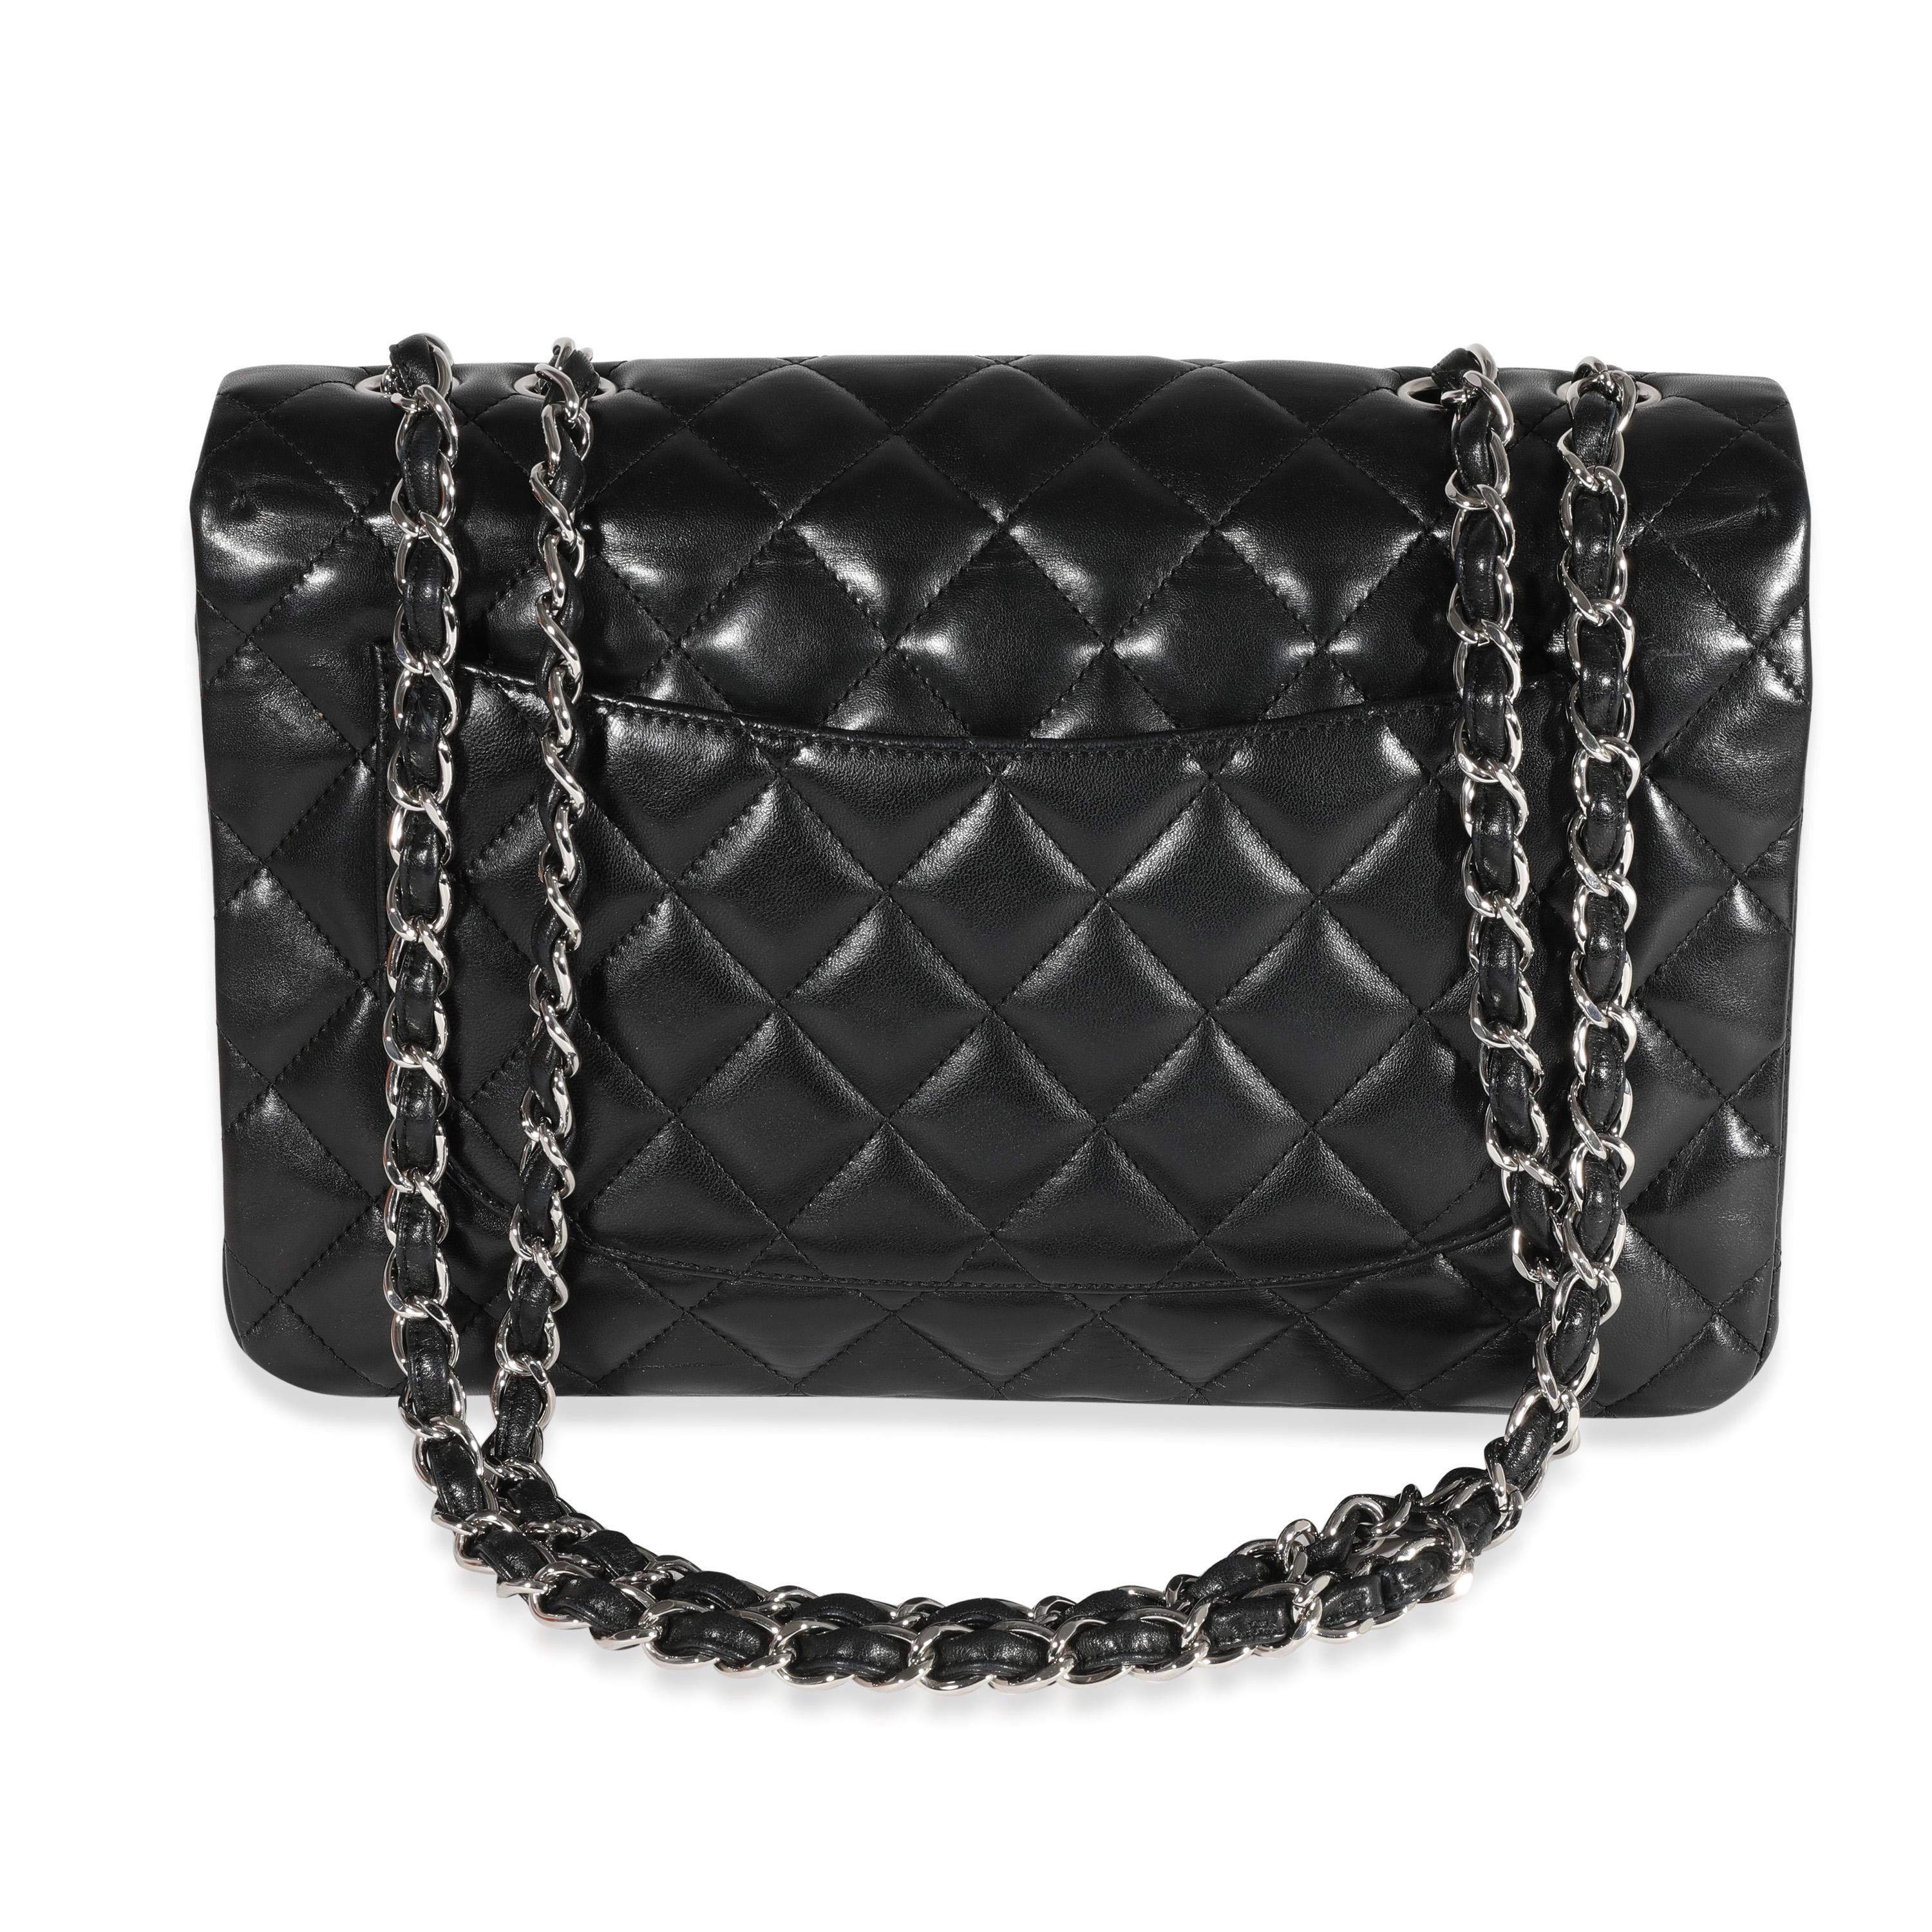 Listing Title: Chanel Black Quilted Lambskin Jumbo Classic Single Flap Bag
SKU: 122172
MSRP: 9500.00
Condition: Pre-owned 
Handbag Condition: Very Good
Condition Comments: Very Good Condition. Scuffing to corners and lightly to exterior. Scratching